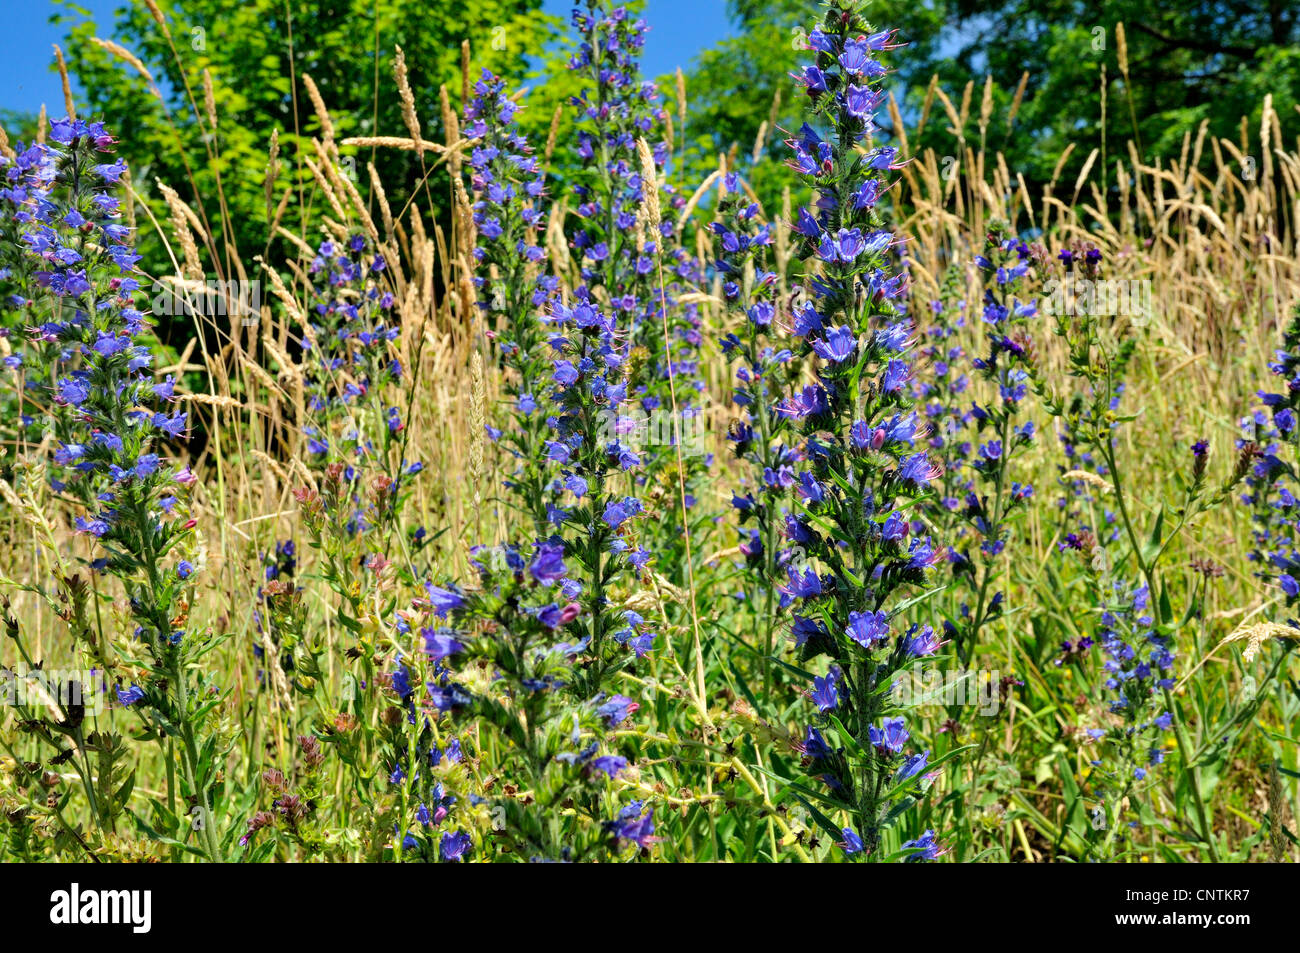 blueweed, blue devil, viper's bugloss, common viper's-bugloss (Echium vulgare), blooming in a meadow, Germany Stock Photo